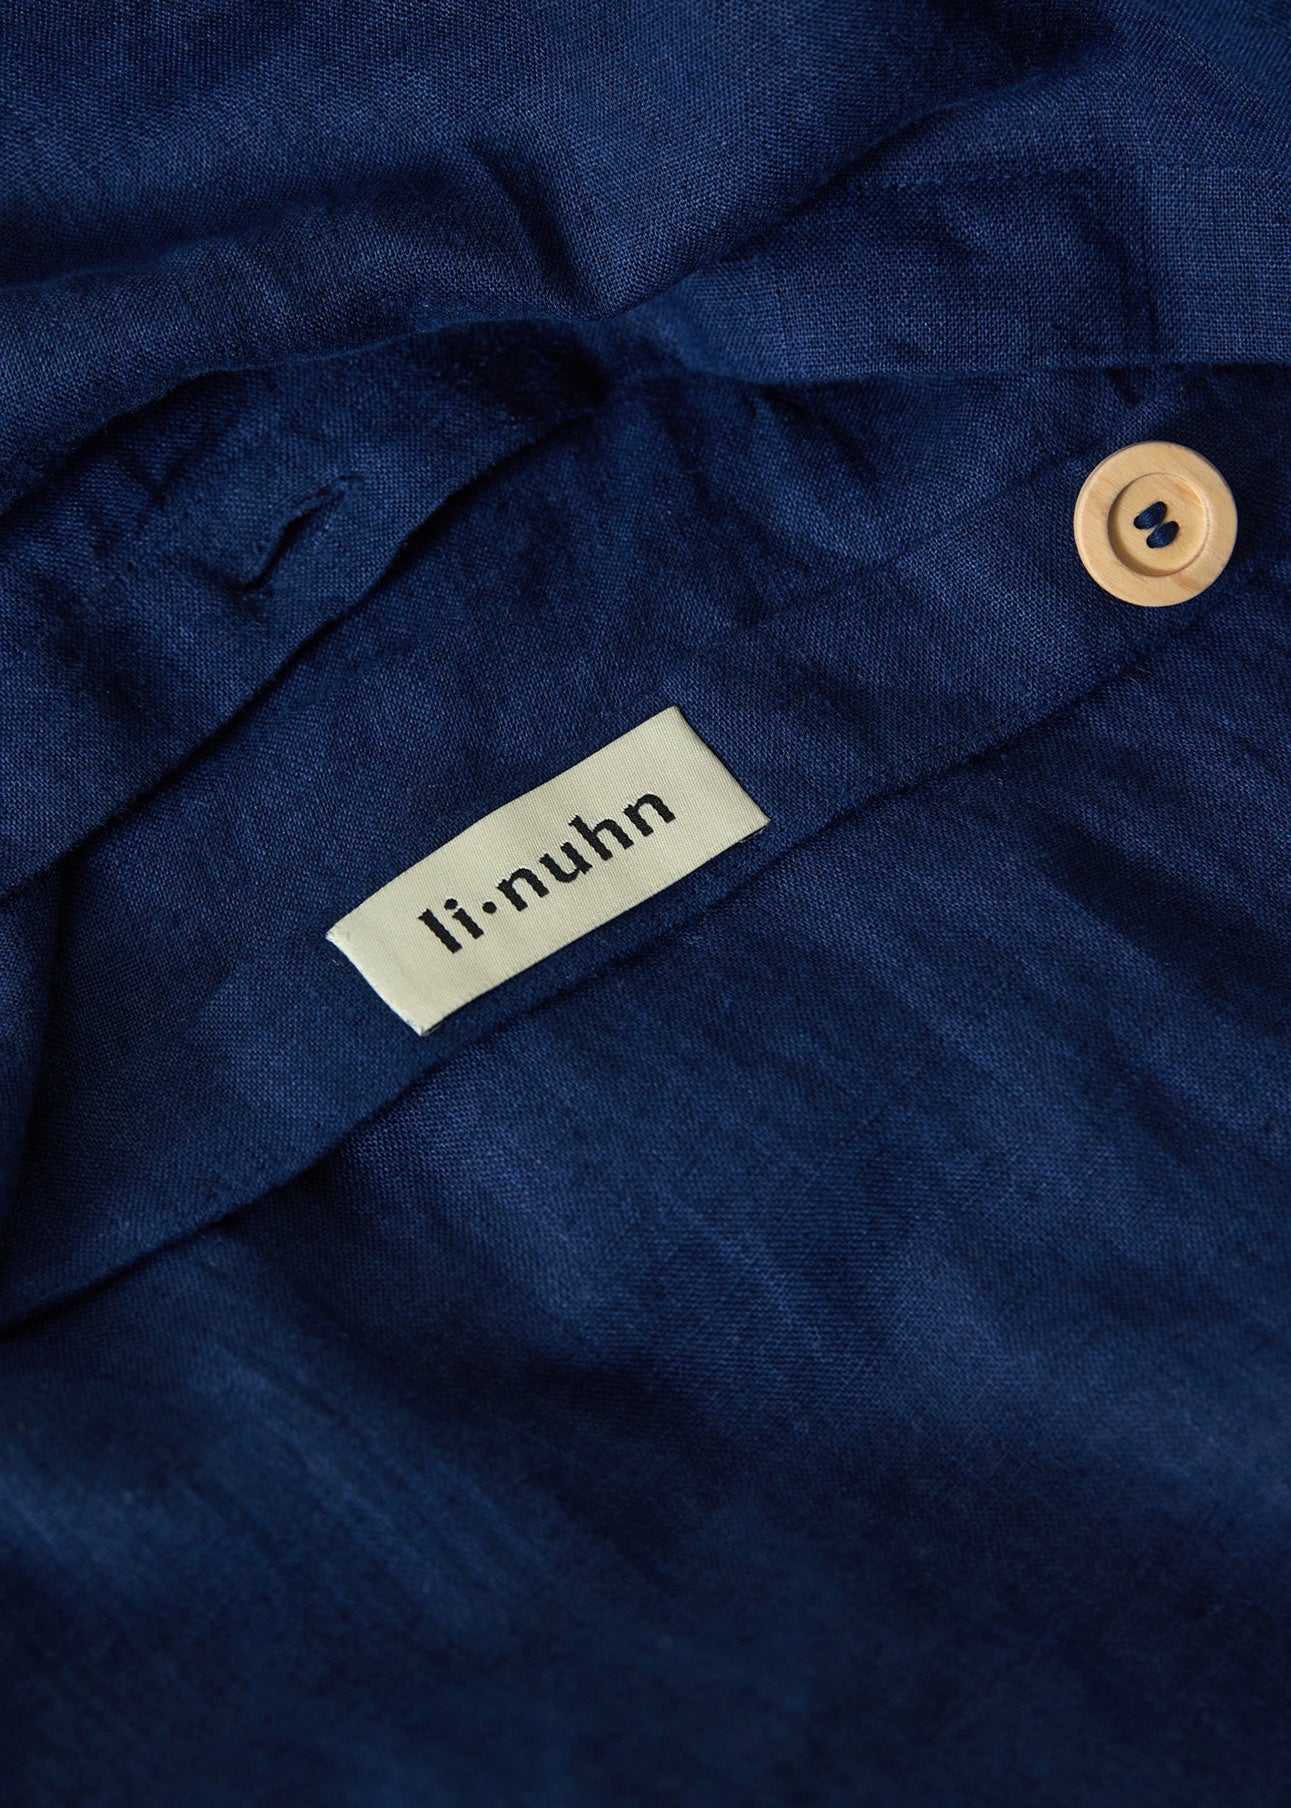 Linuhn linen bedding sheets in Baltic navy blue natural fabric organic and ethically made